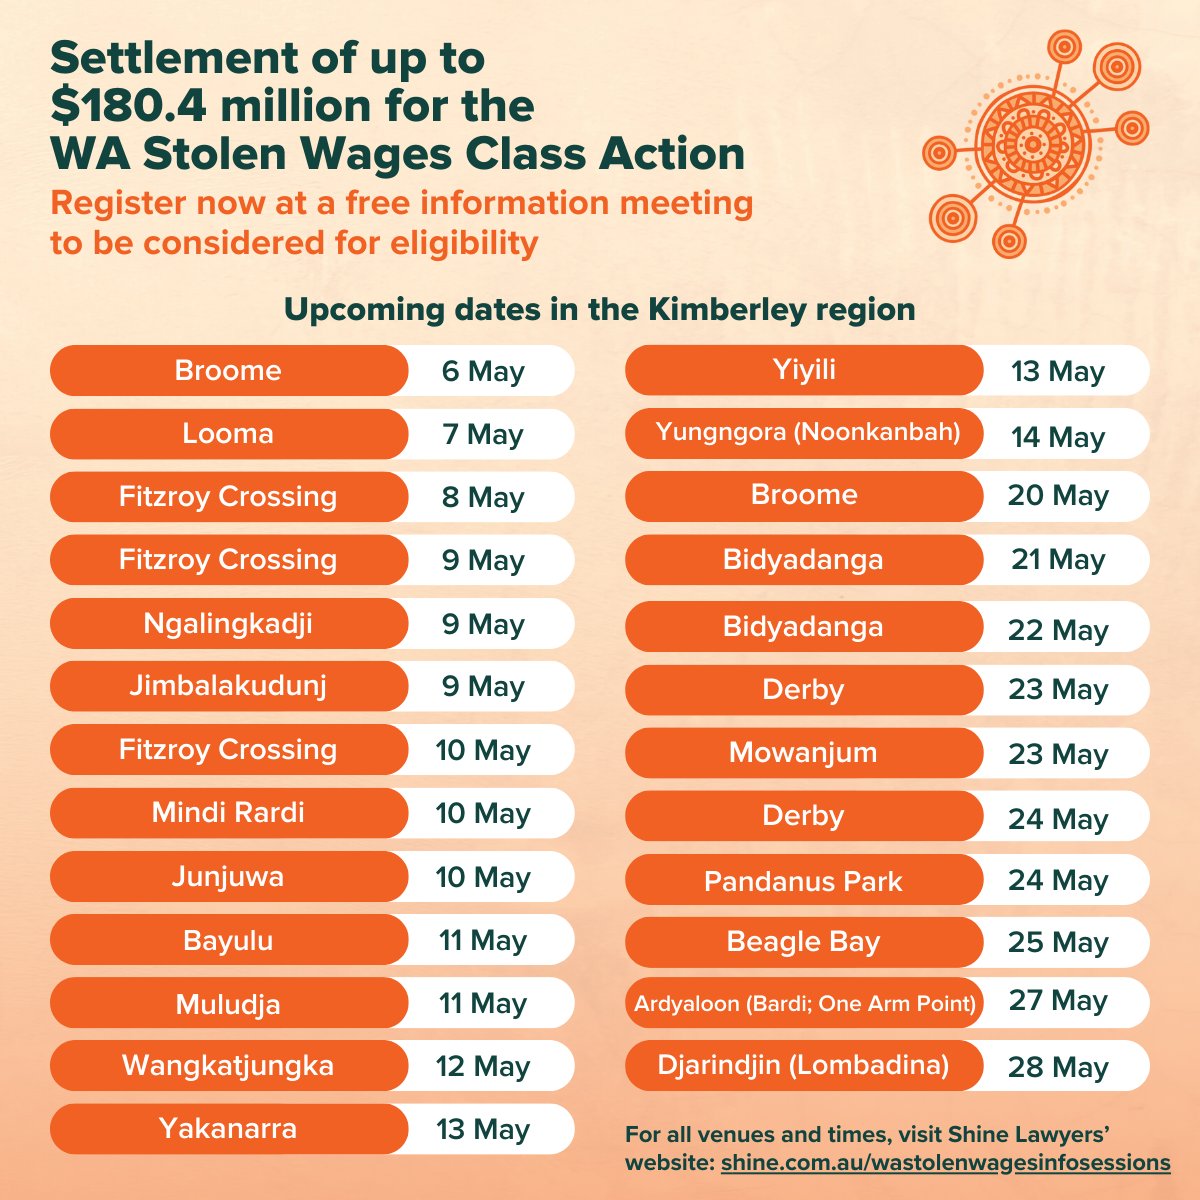 📣 We're on the road in May visiting the Kimberley region of Western Australia to help communities with the WA Stolen Wages Class Action settlement worth up to $180.4 million.

📌 Info: bit.ly/stolenwagesinfo

#westernaustralia #stolenwages #classaction #kimberley #rightwrong